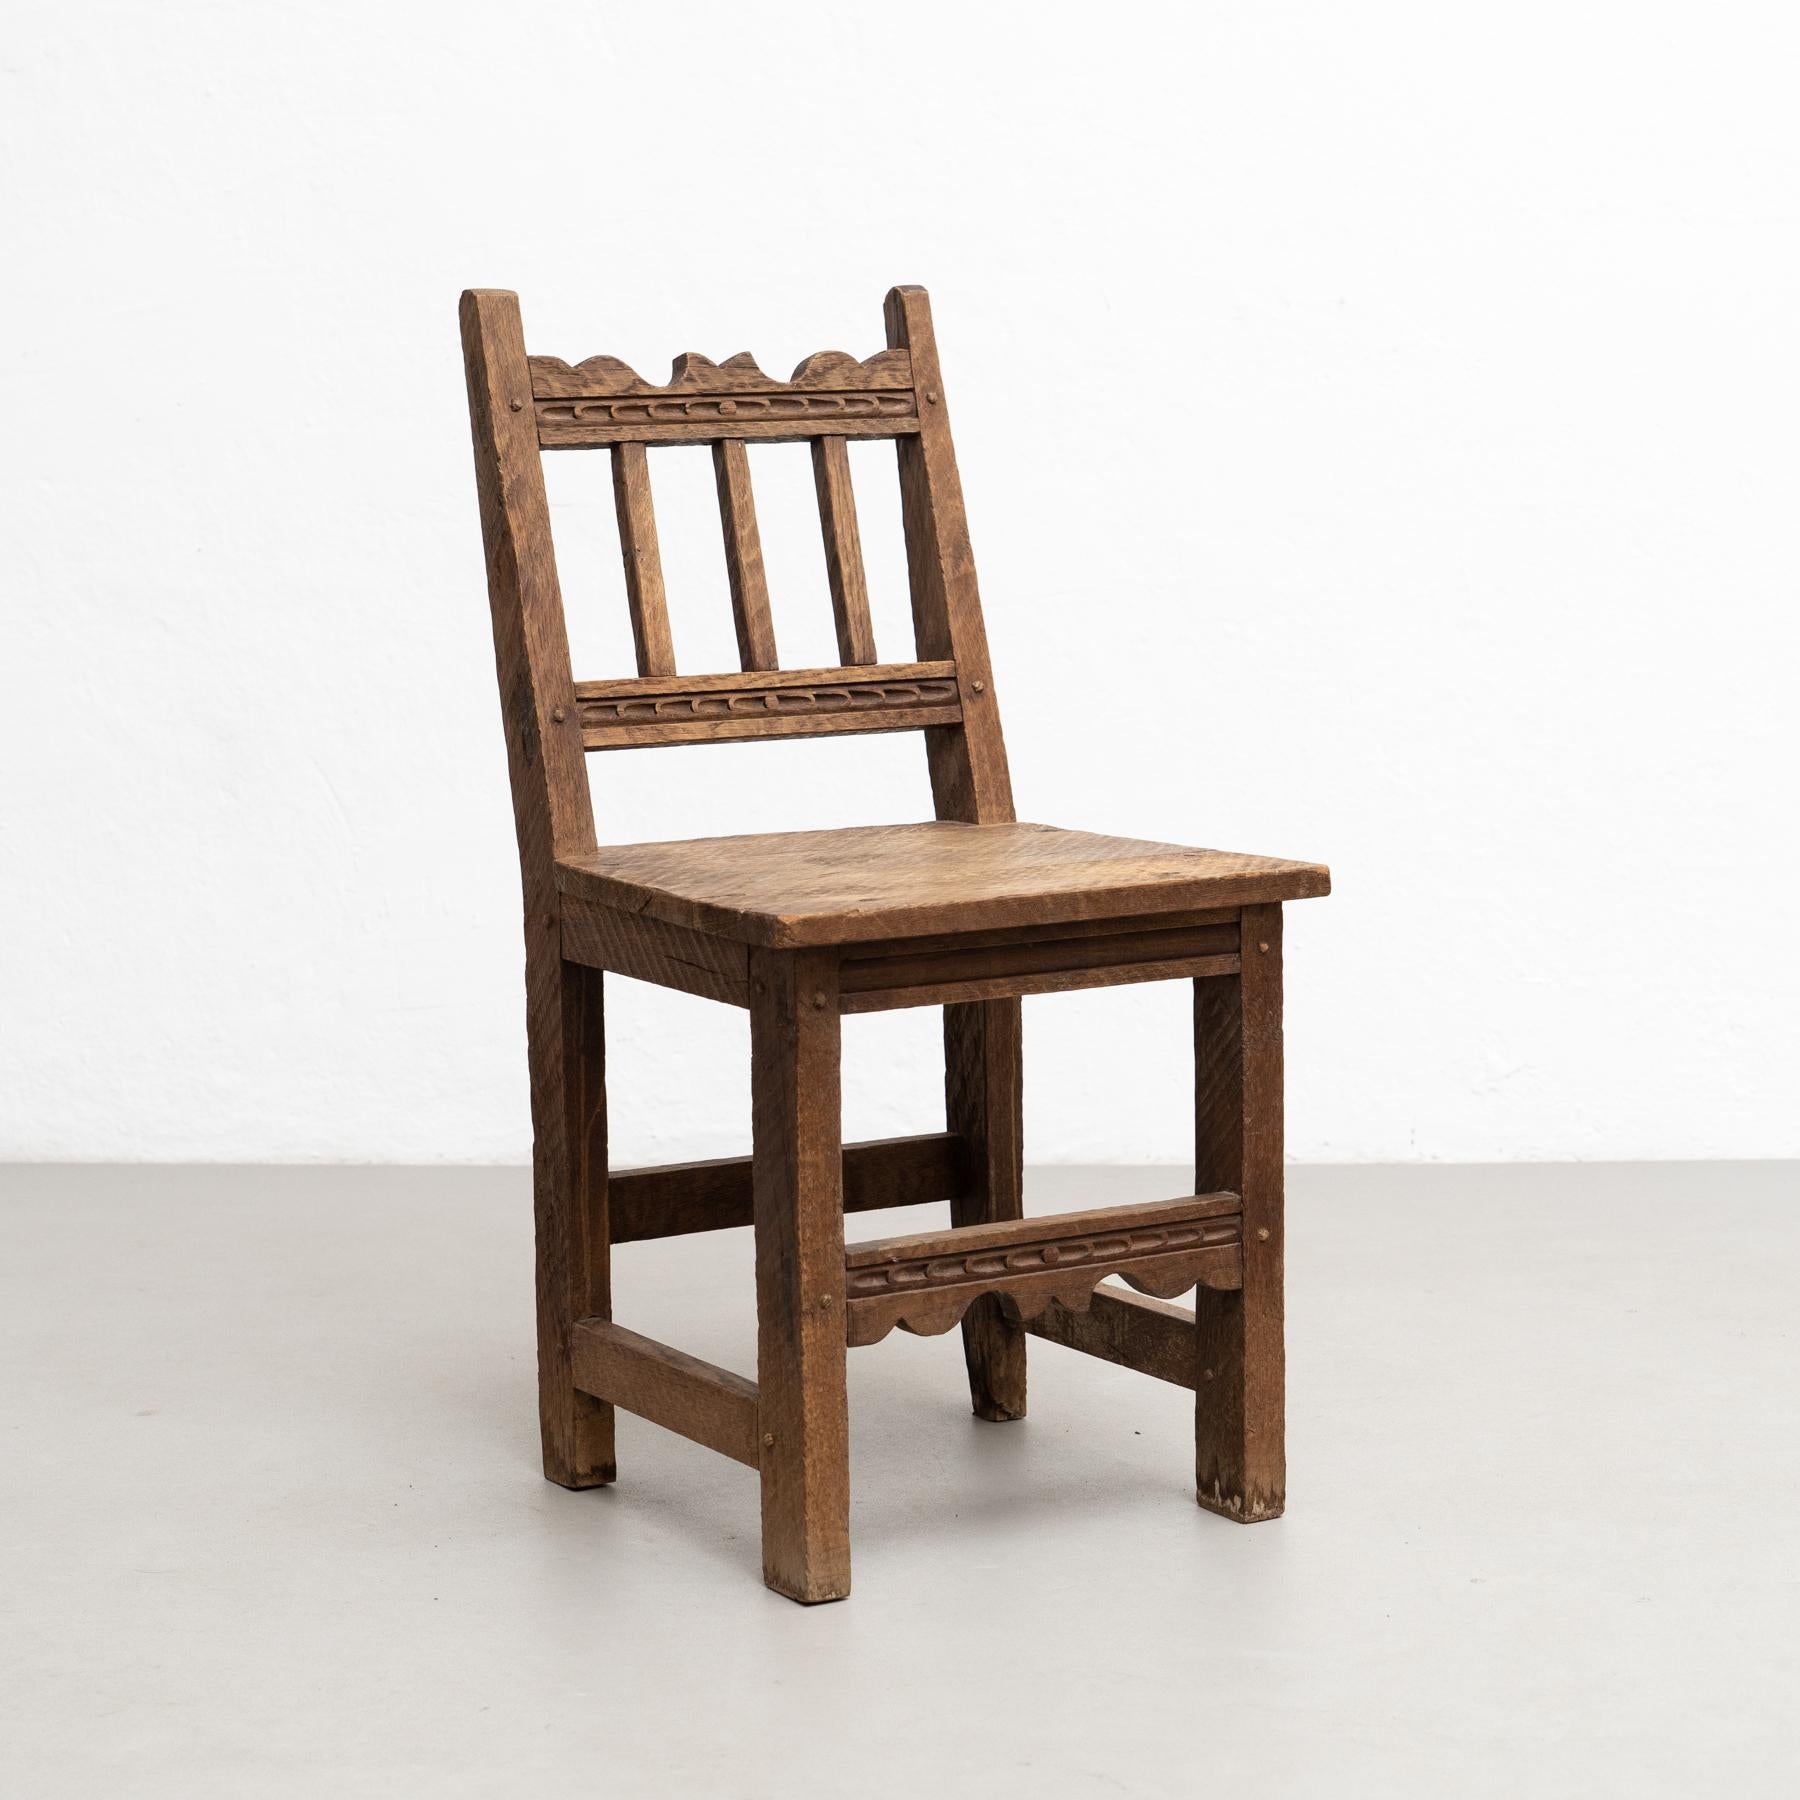 Mid-20th Century Set of Four Mid-Century Modern Rationalist Wood Chairs, Rustic Charm, circa 1940